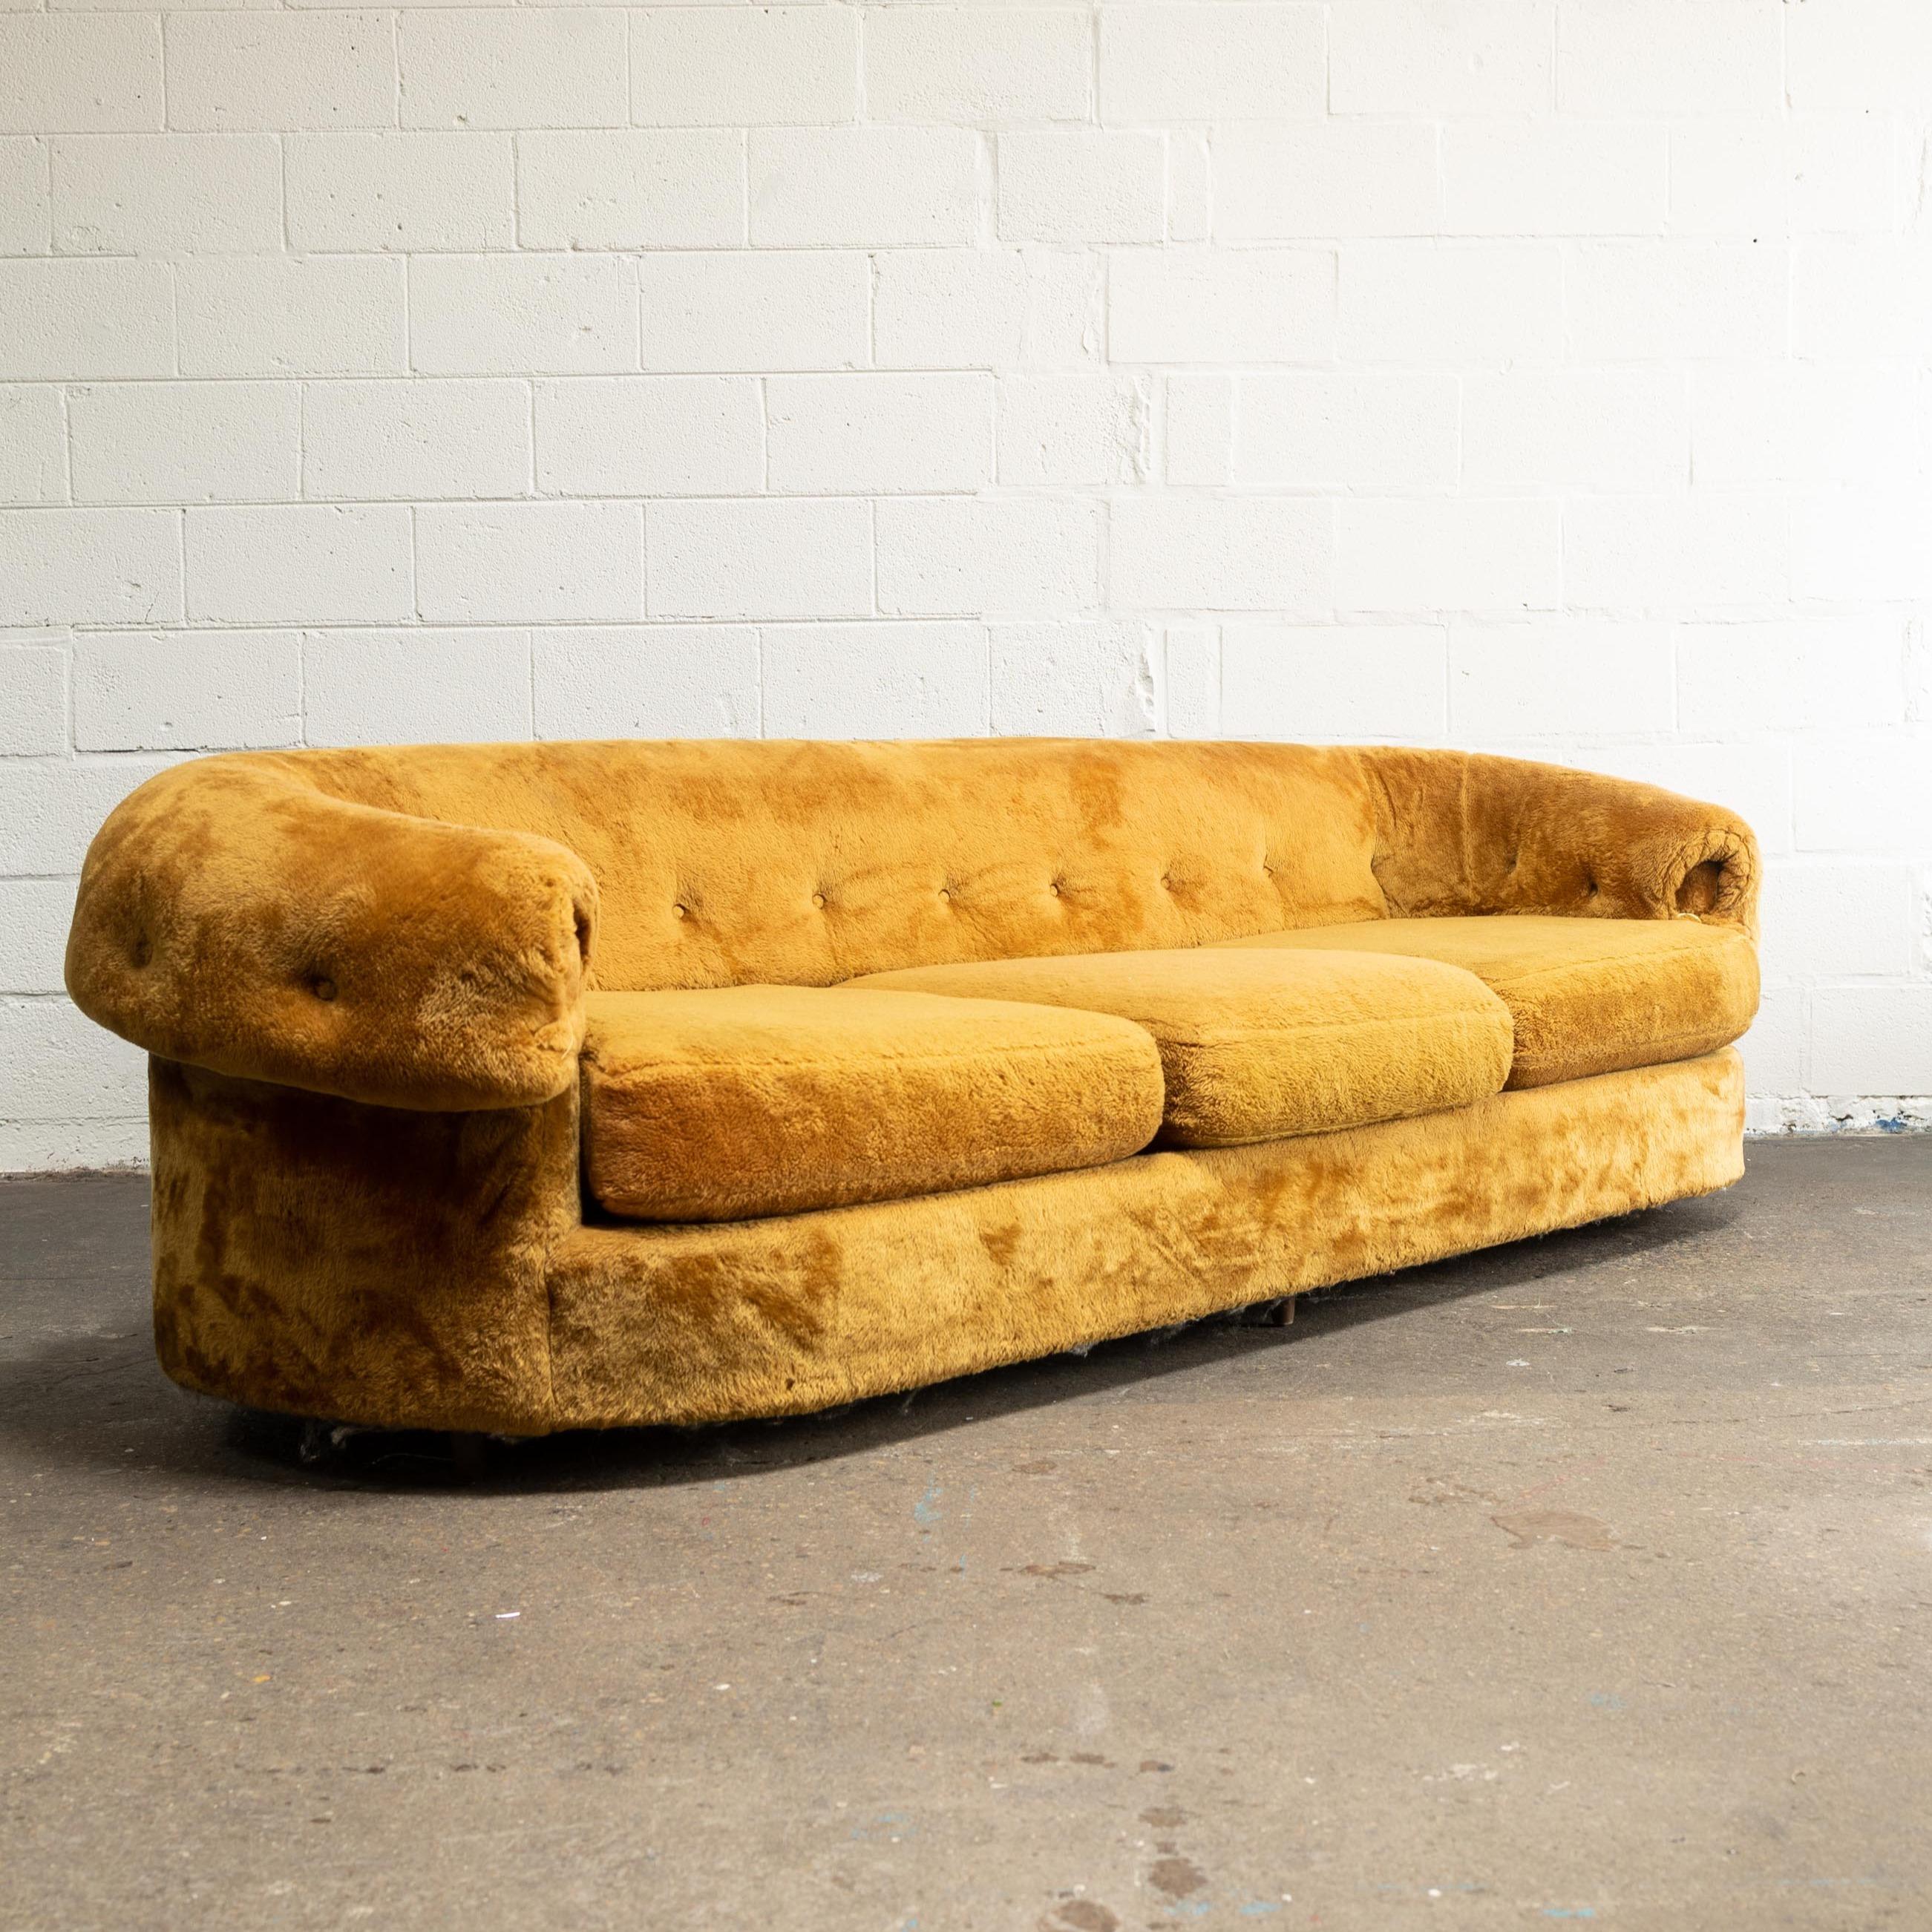 This plush sofa features it's original fabric in excellent condition and arm covers unopened in their original packaging. It has been rarely used and is incredibly comfortable.